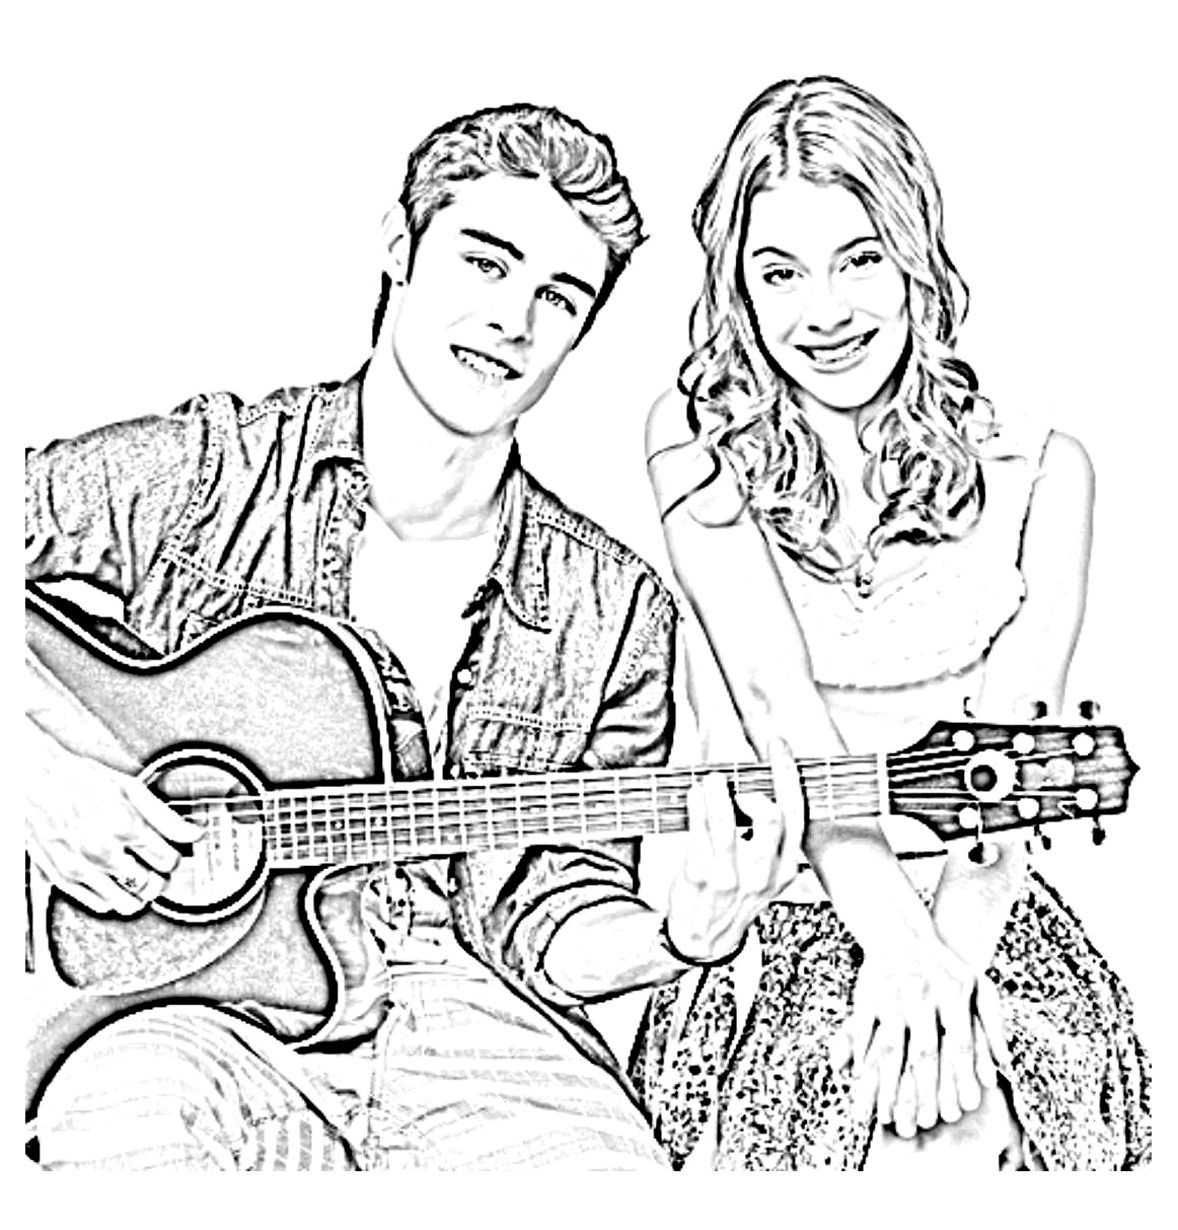 Violetta to download - Violetta Kids Coloring Pages